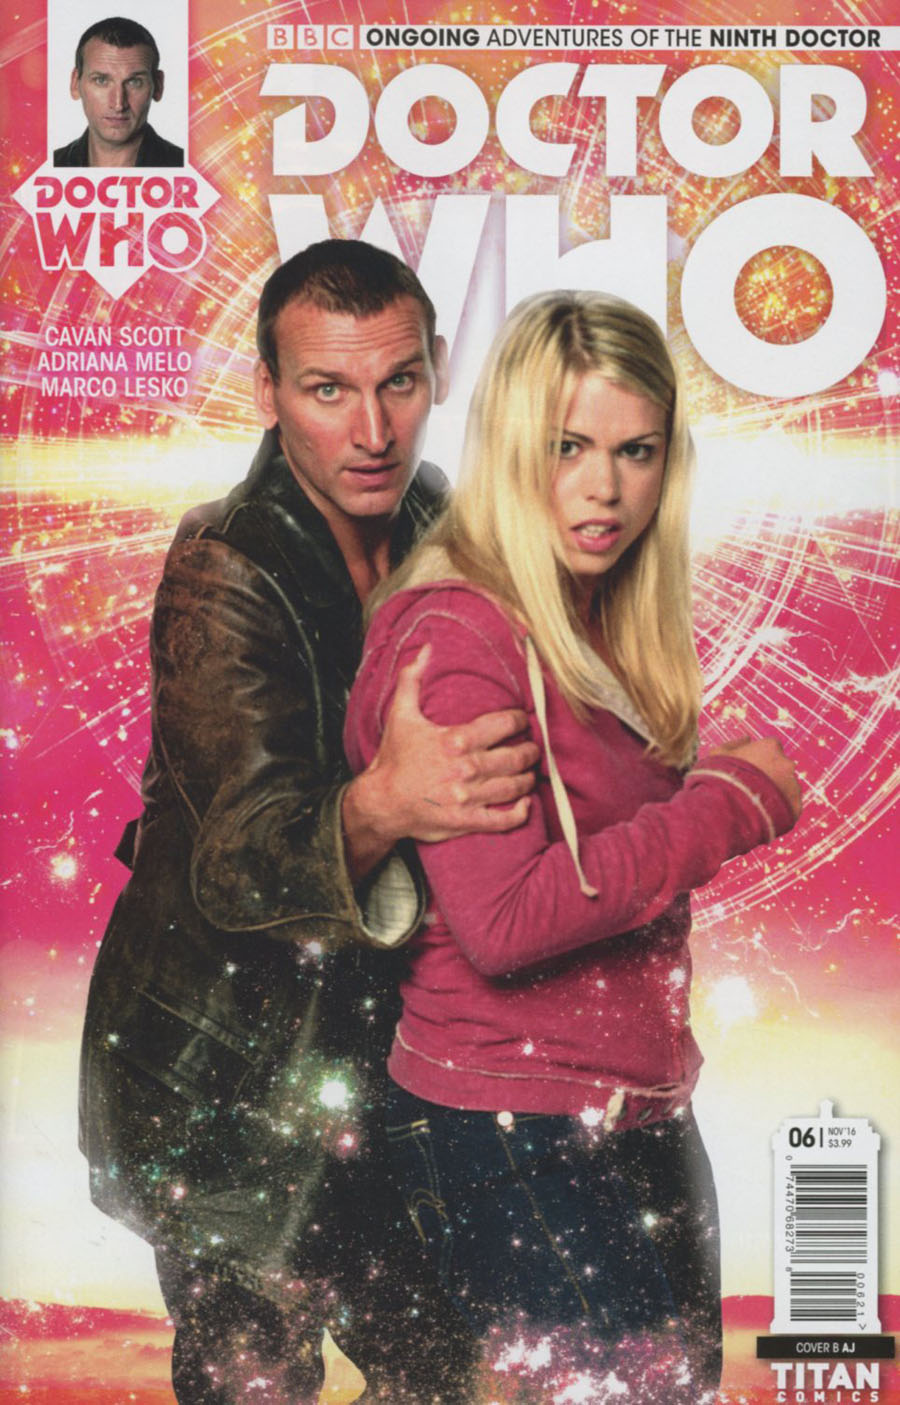 Doctor Who 9th Doctor Vol 2 #6 Cover B Variant Photo Cover